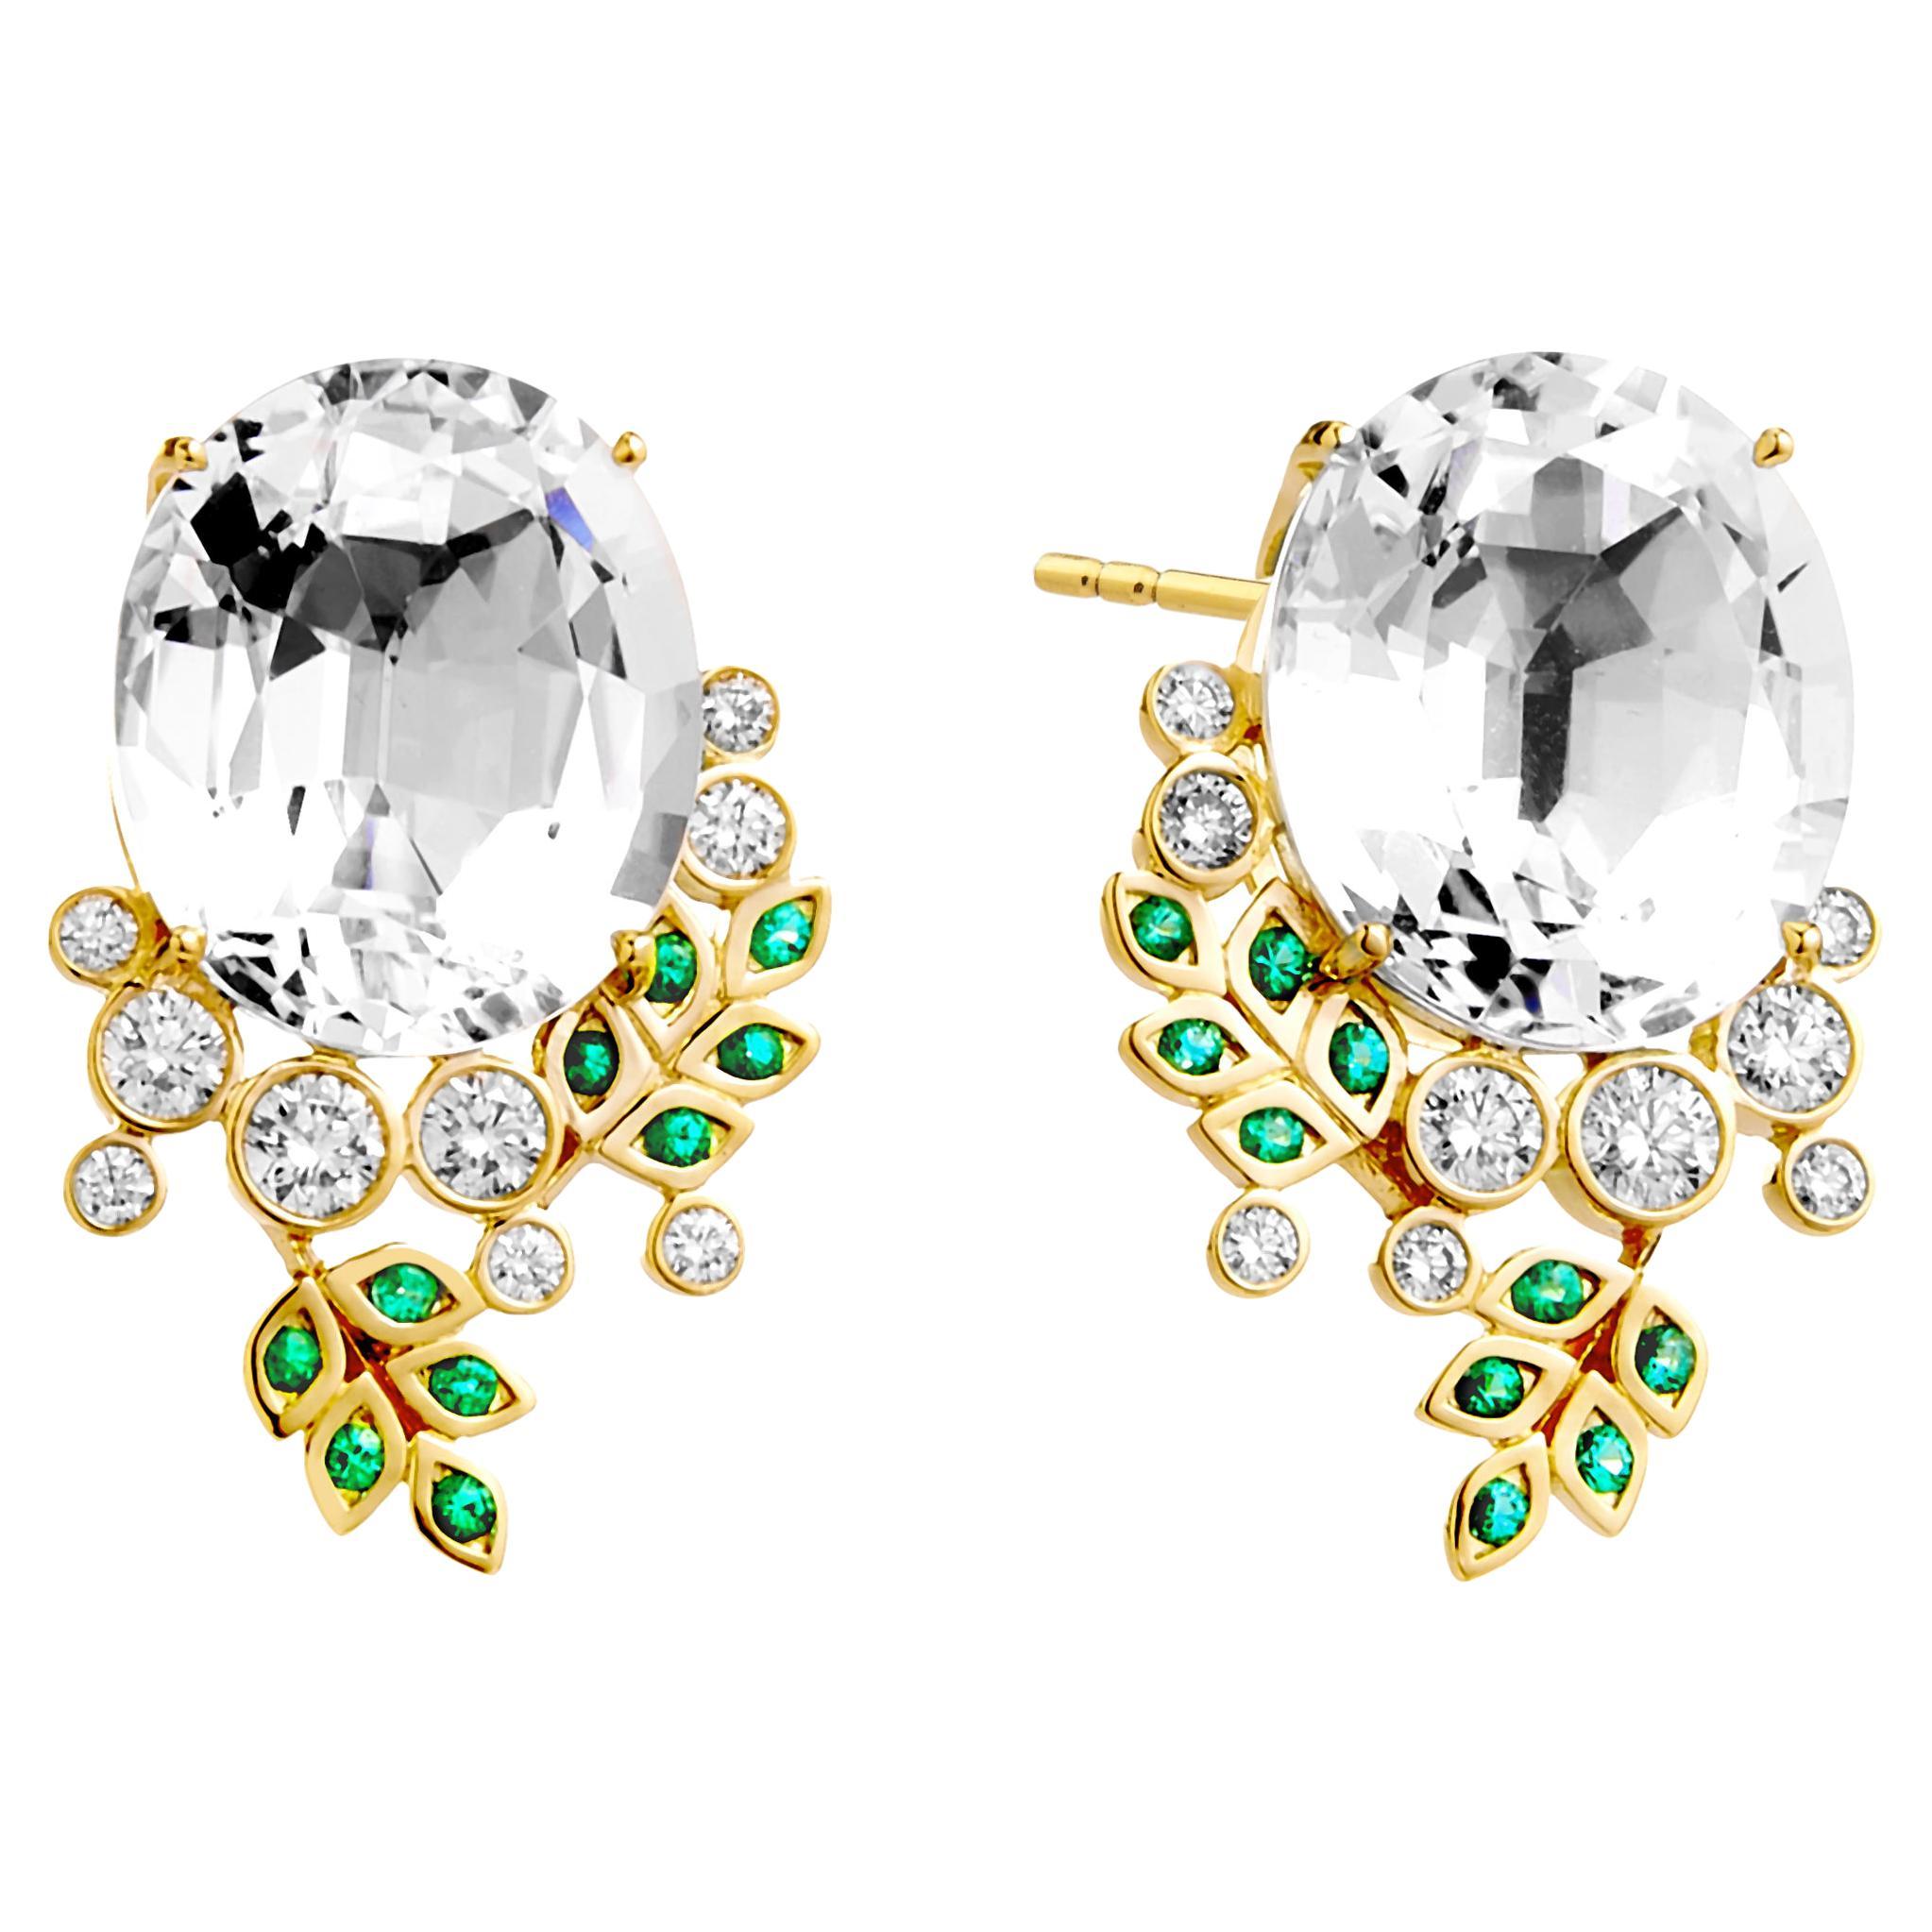 Syna Yellow Gold Rock Crystal Earrings with Emeralds and Champagne Diamonds